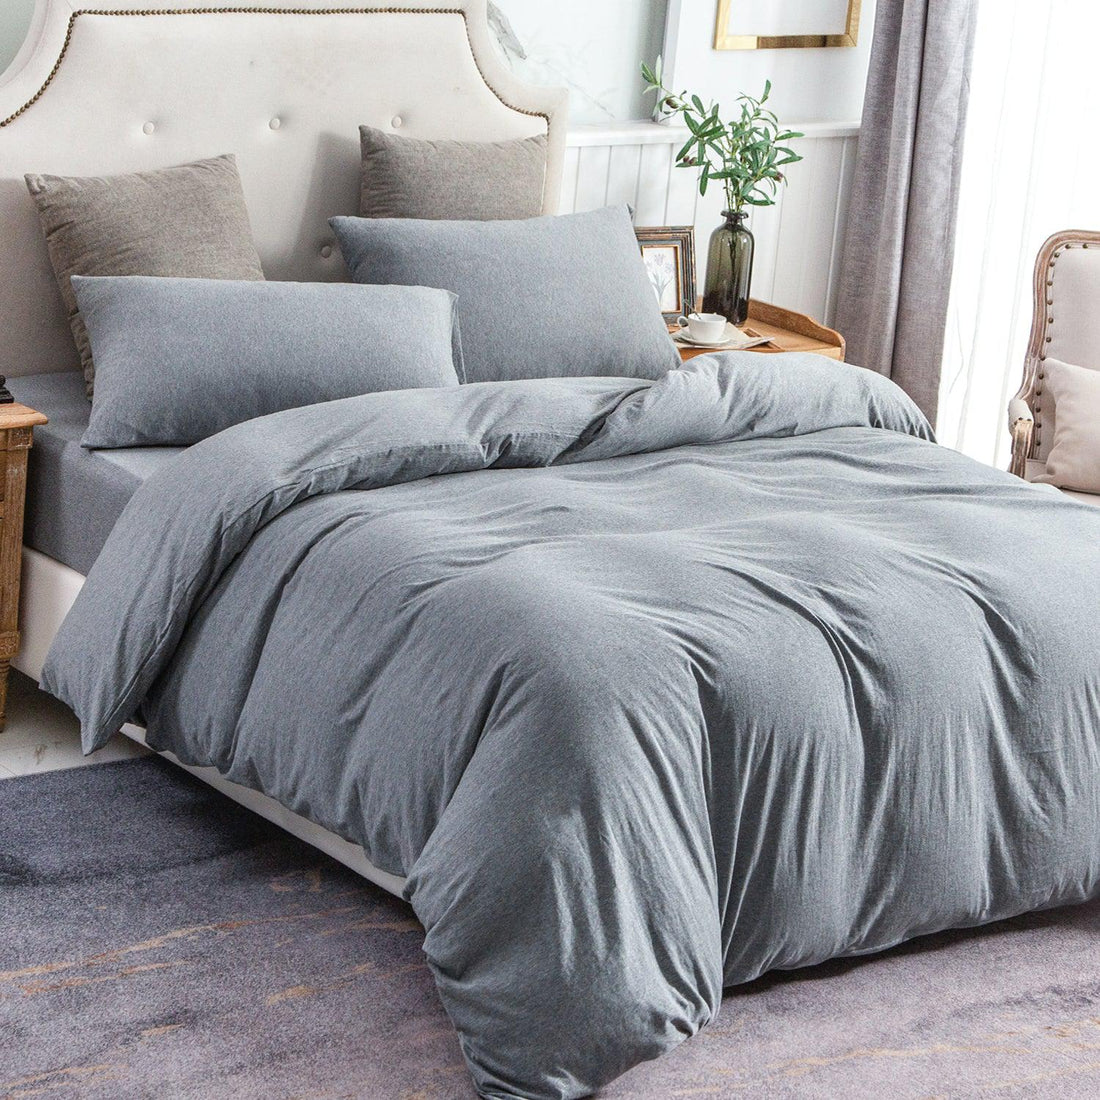 Pure Era - Jersey Duvet Cover Set - Solid Blueish Gray